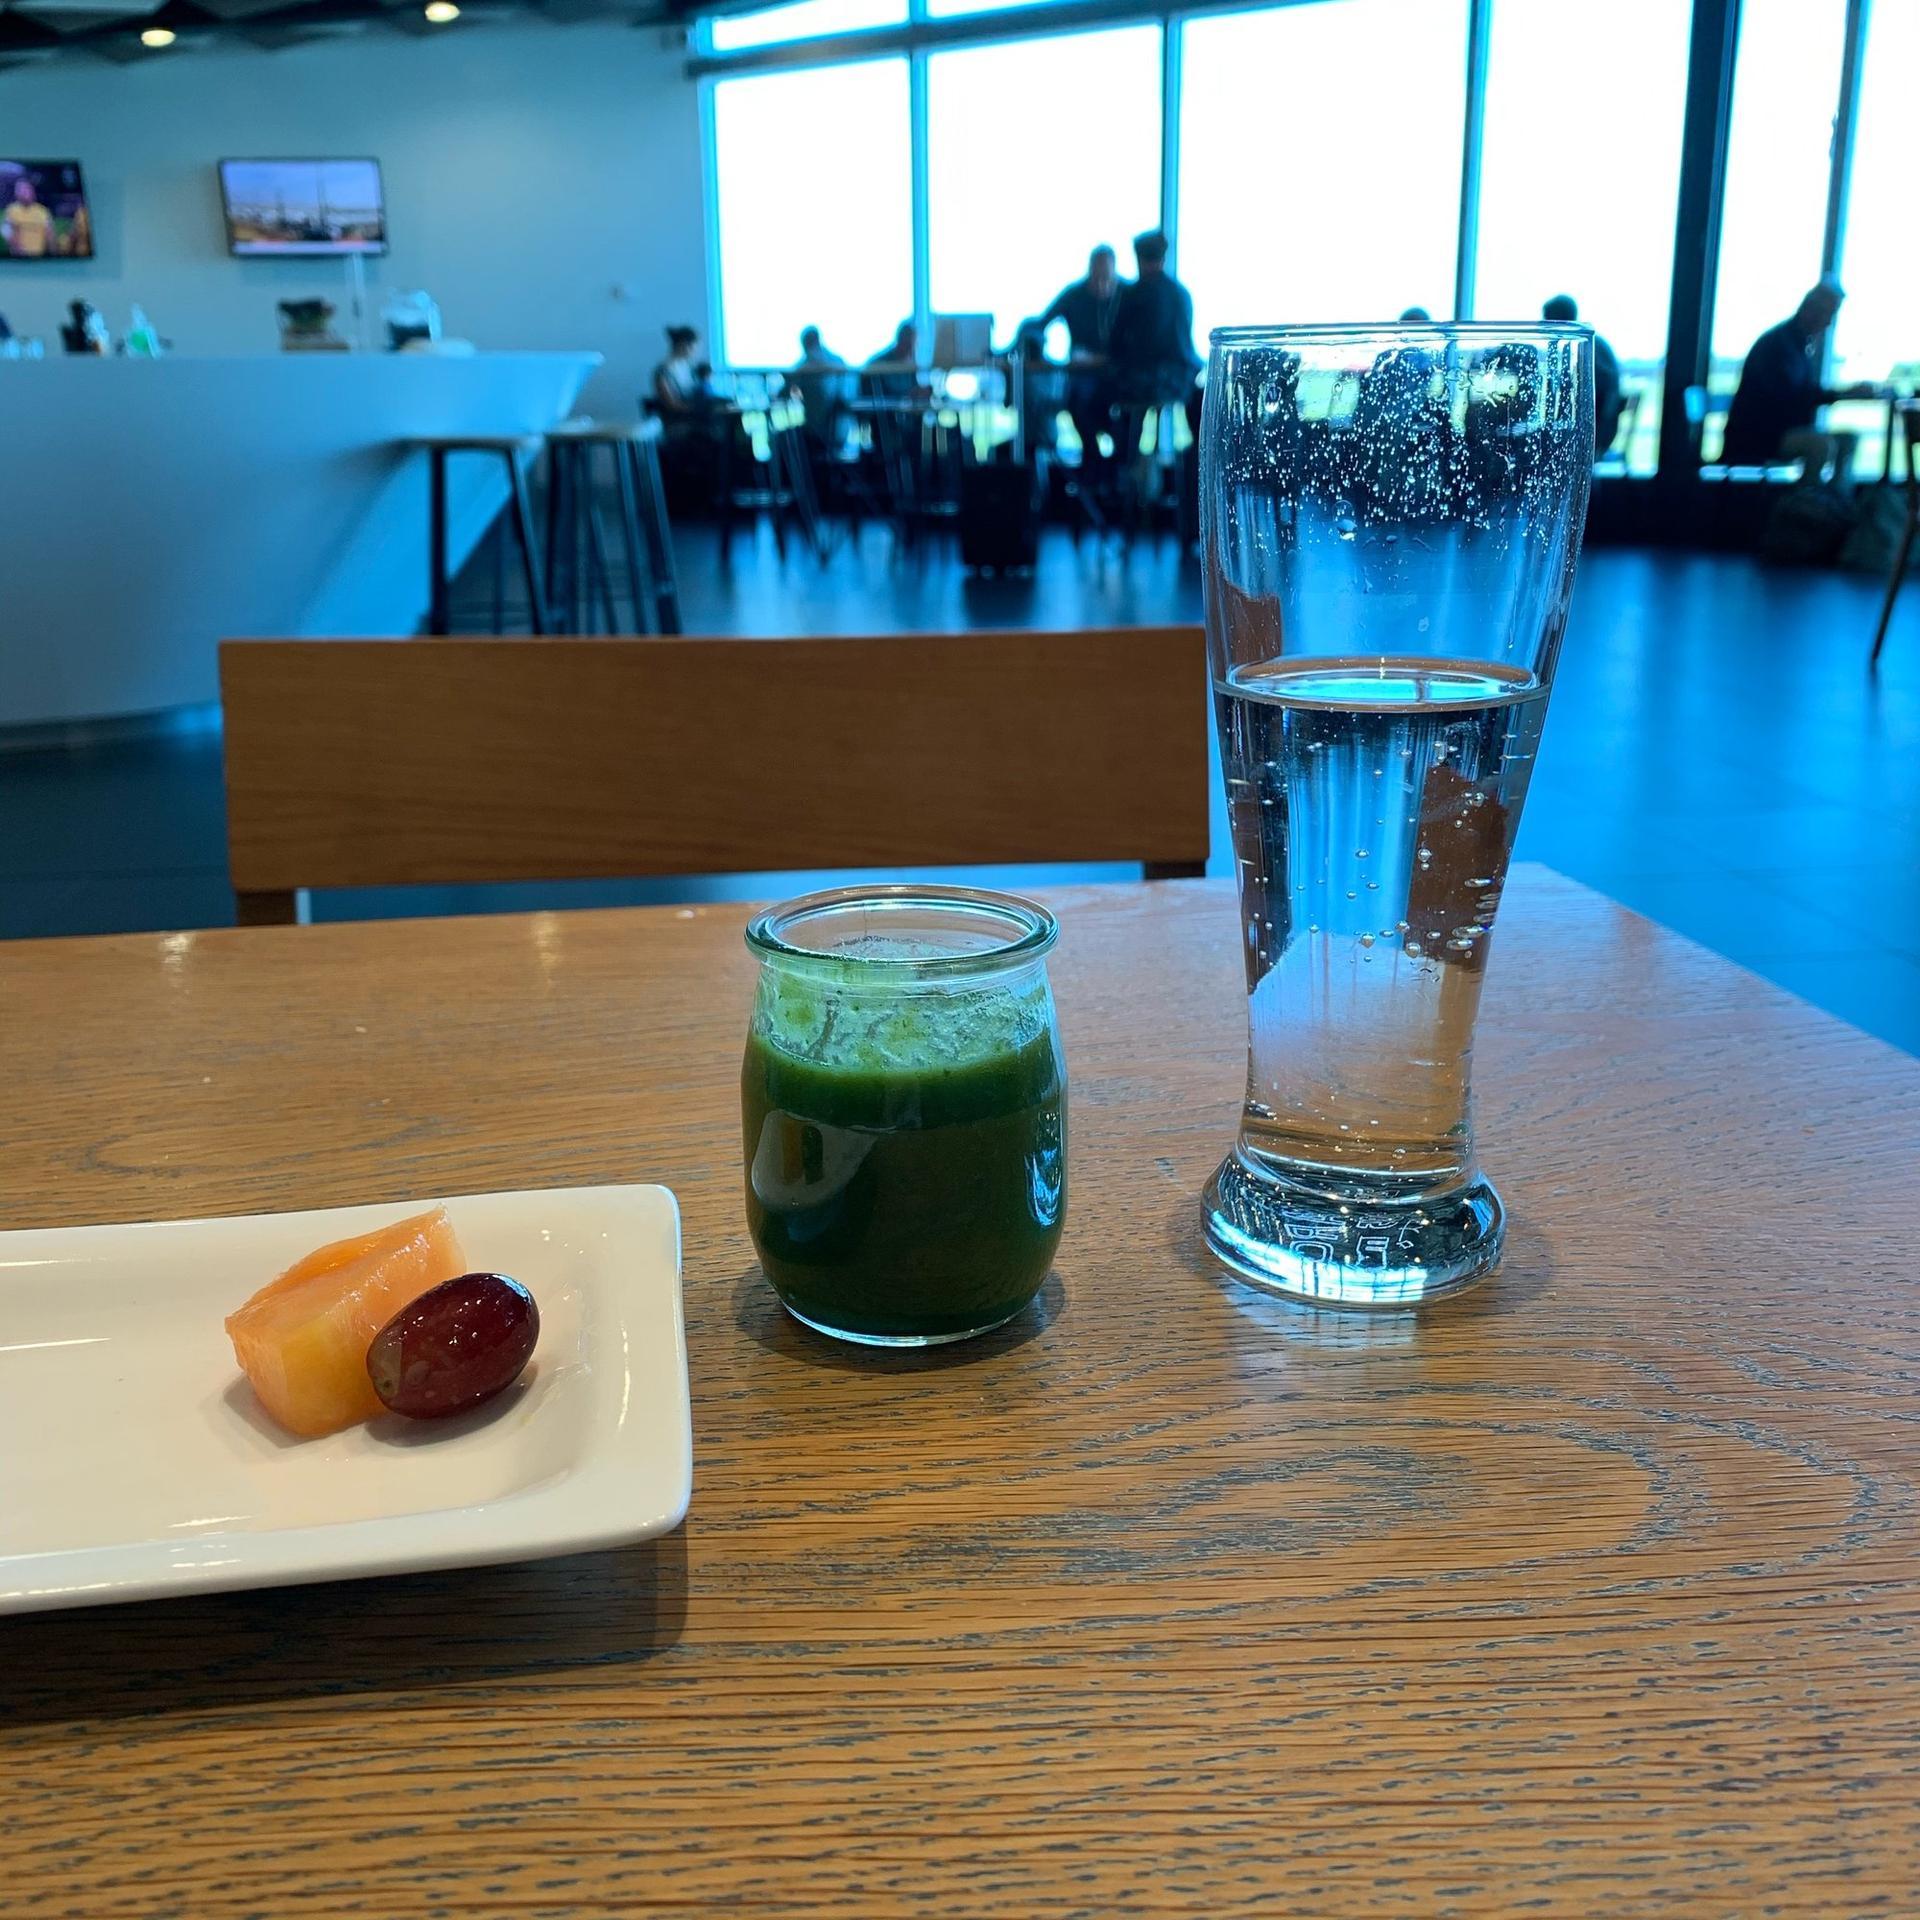 Air New Zealand Domestic Lounge image 3 of 6